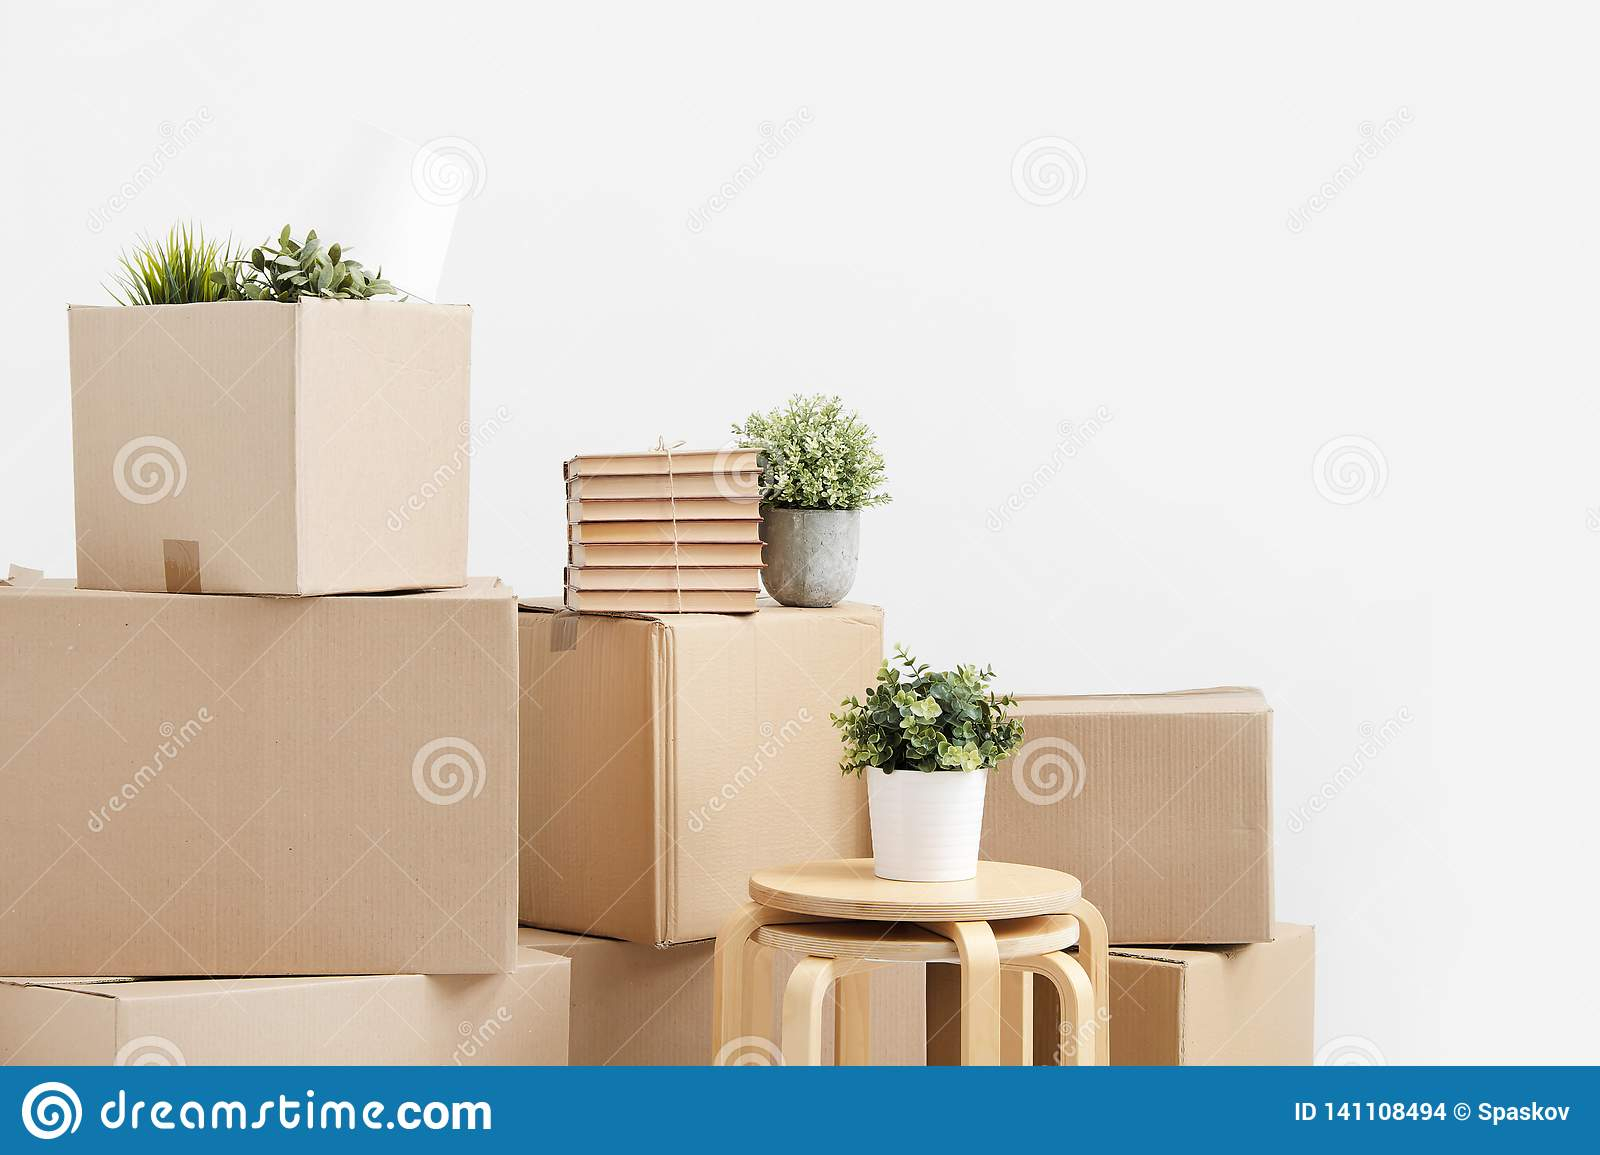 Cardboard Boxes Of Things Are Stacked On The Floor Against A for measurements 1600 X 1155